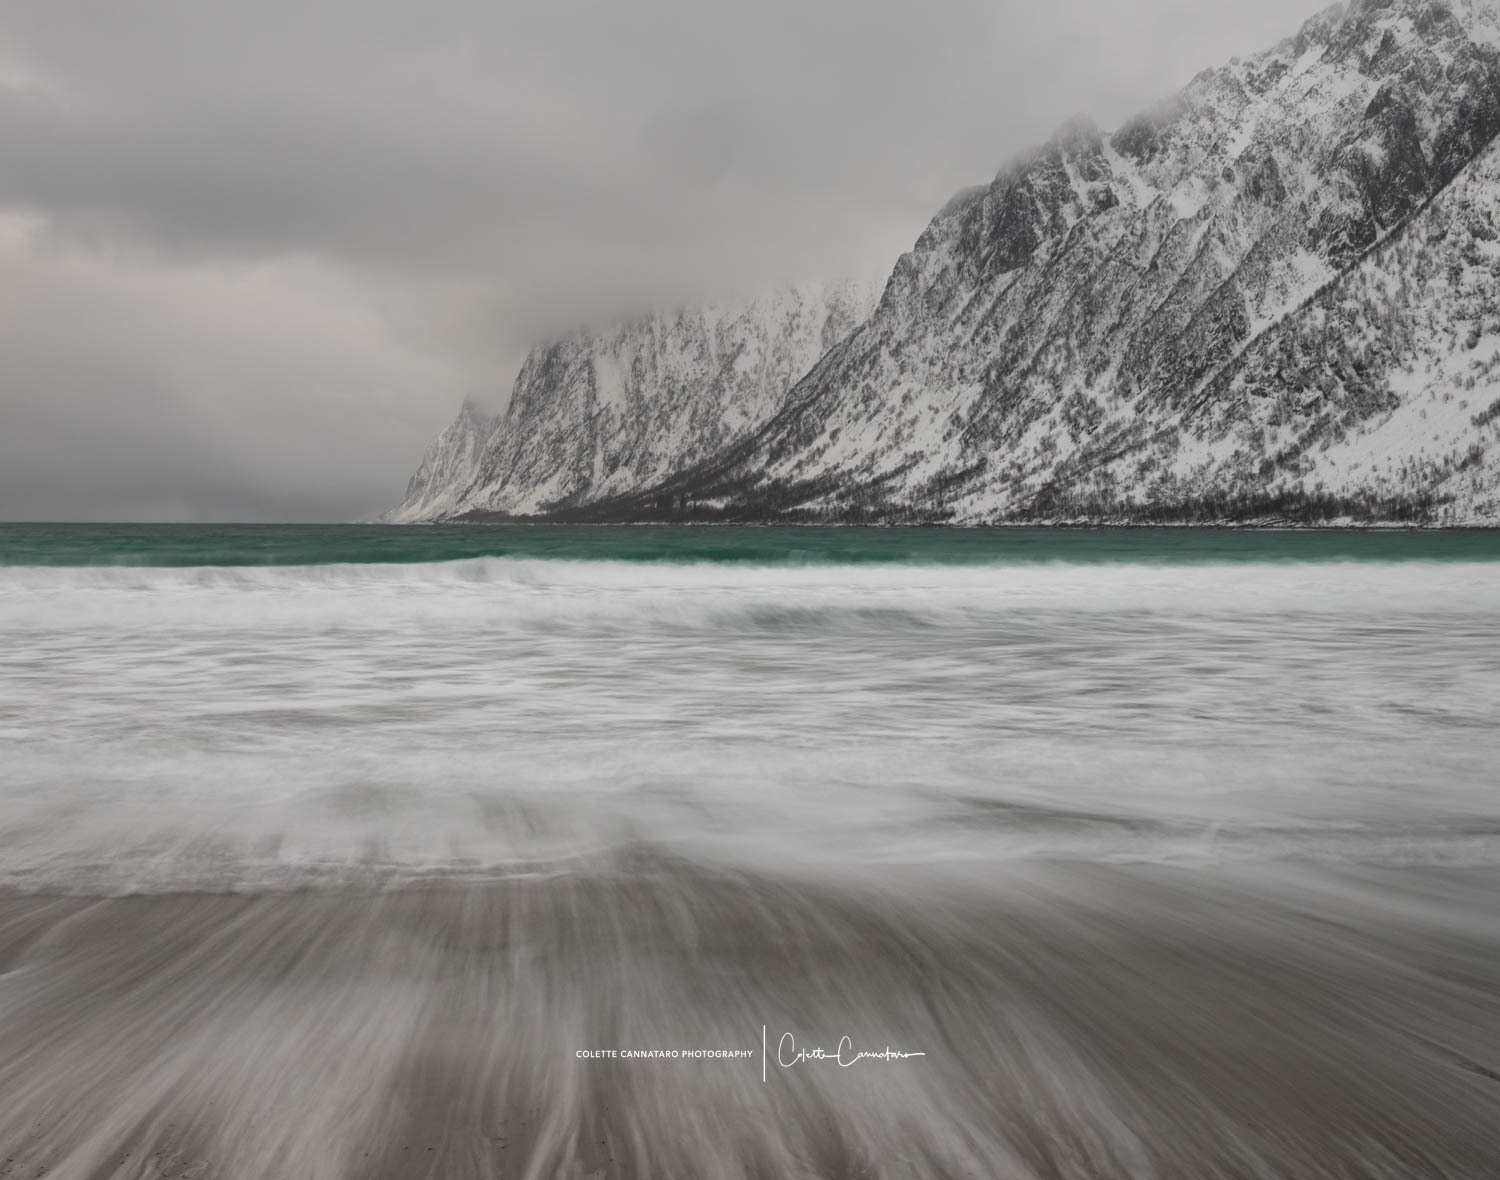 A beautiful Norwegian beach with a pop of turquoise between the mountains and the shore